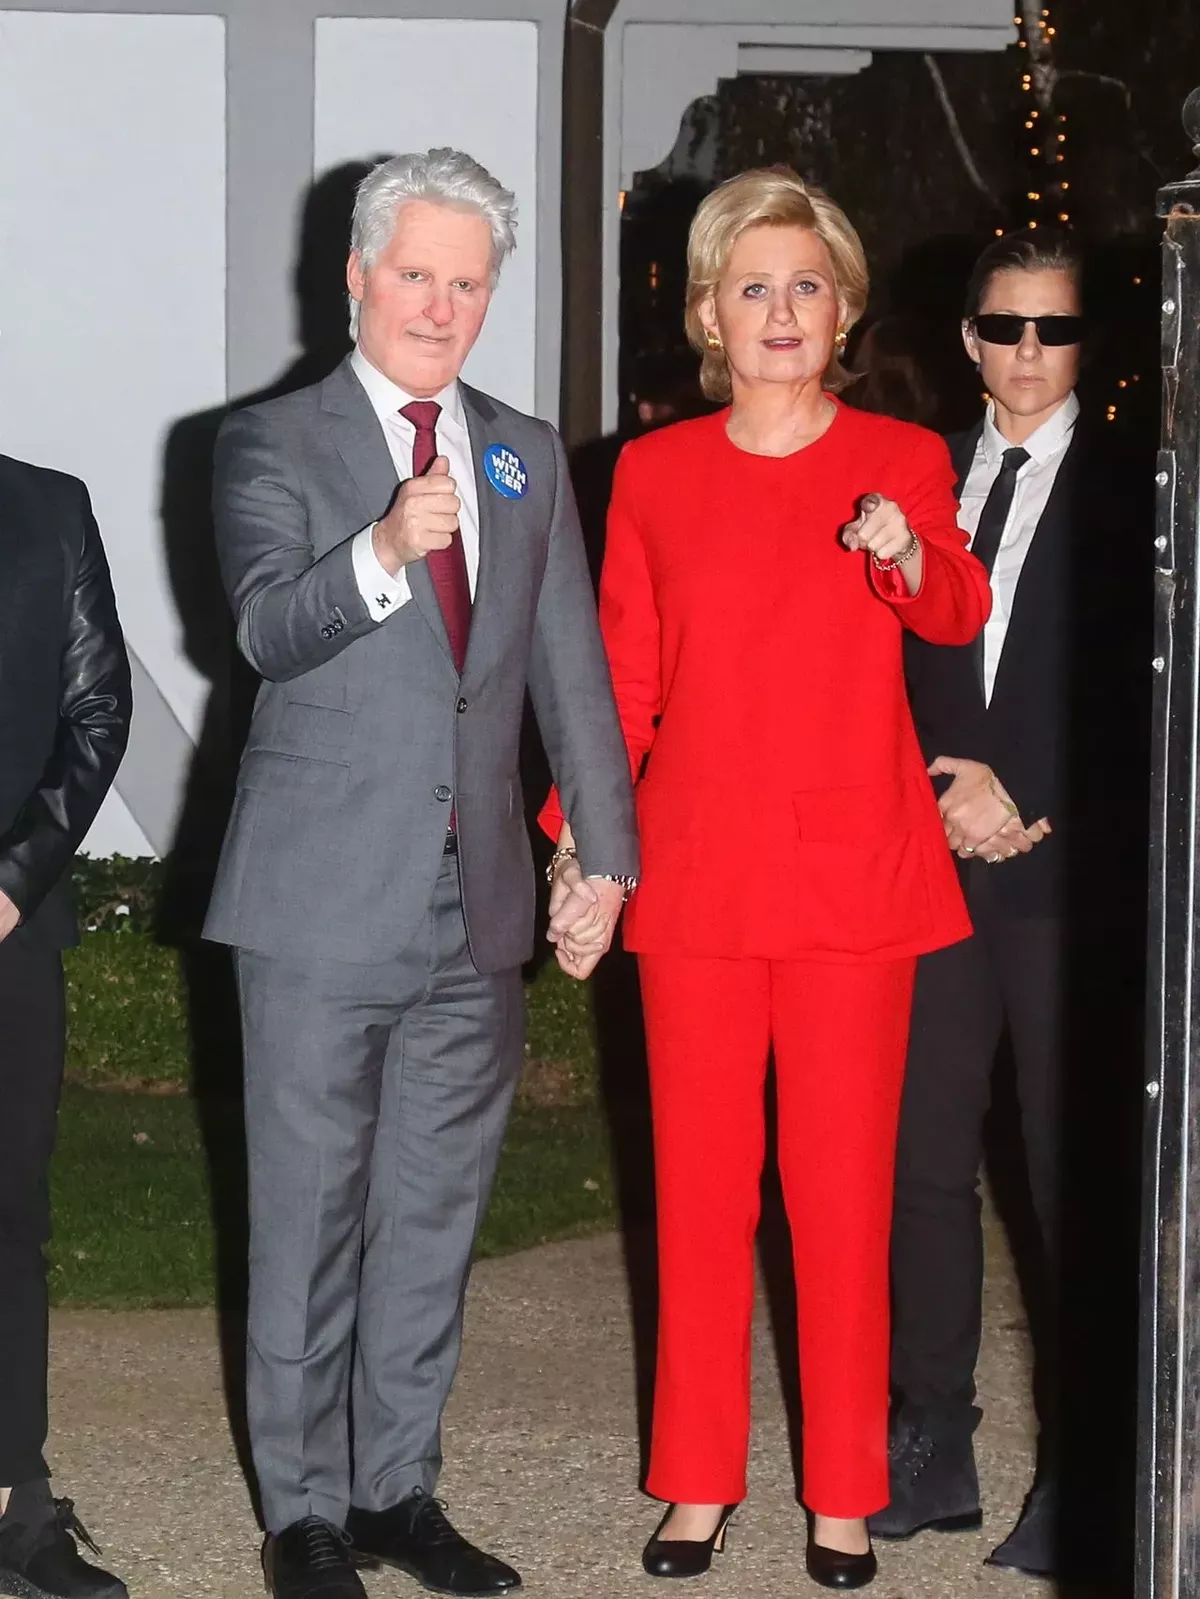 Katy Perry dressed up as Hillary Clinton